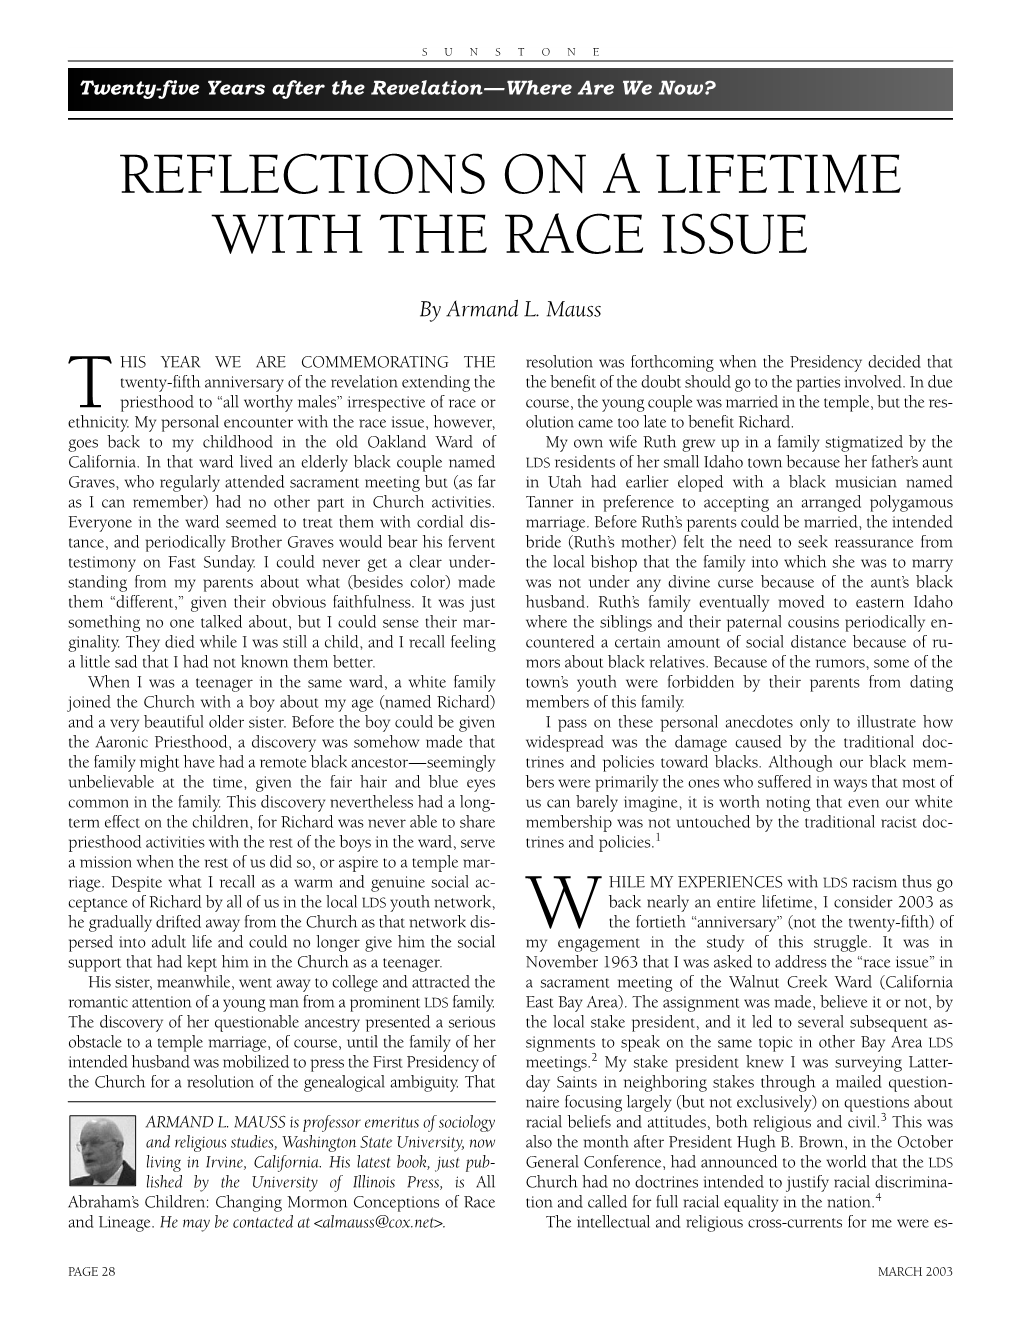 Reflections on a Lifetime with the Race Issue